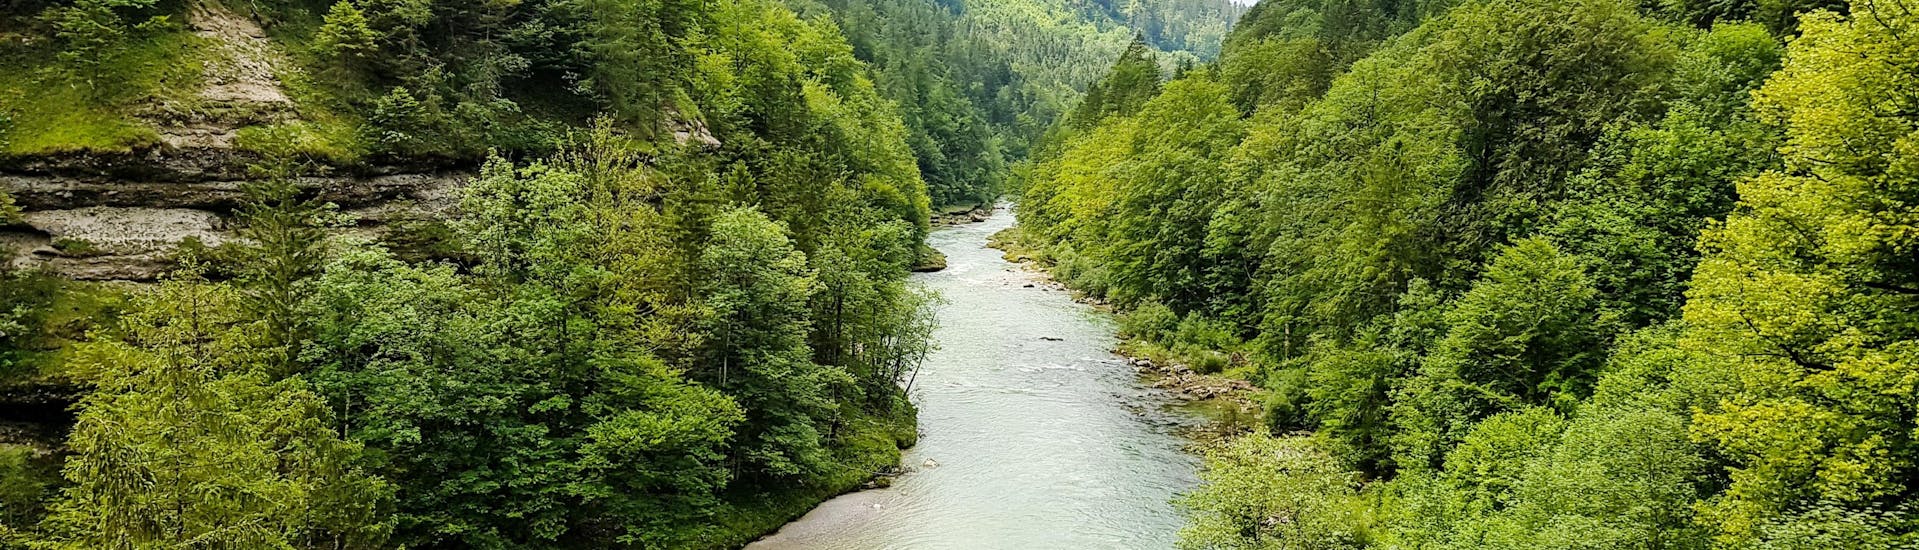 An image of the Salza River, whose rapids make for an ideal place to go rafting in the Gesäuse National Park.